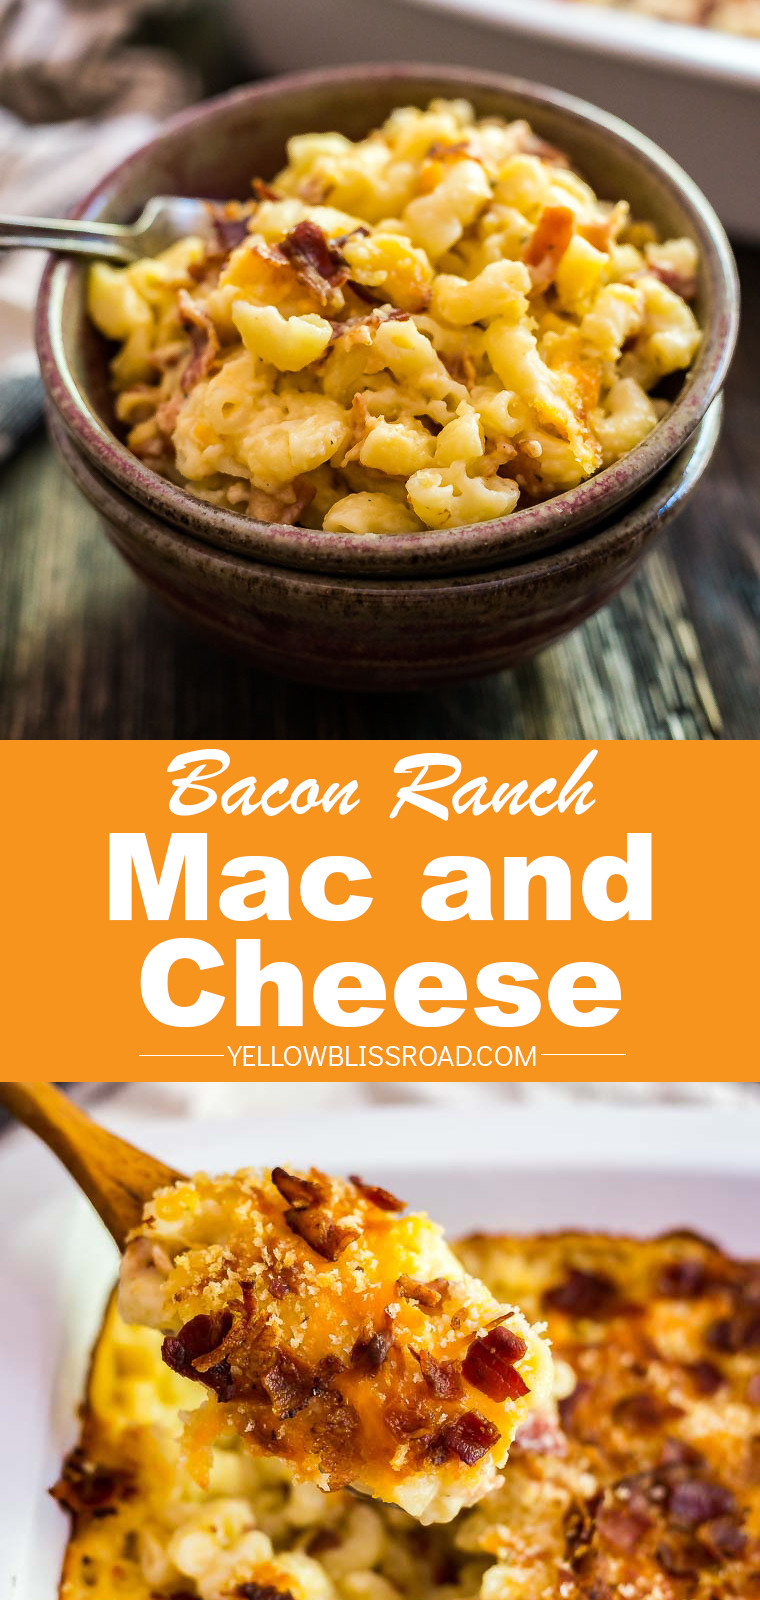 Baked Mac And Cheese With Chicken And Bacon
 Bacon Ranch Macaroni & Cheese